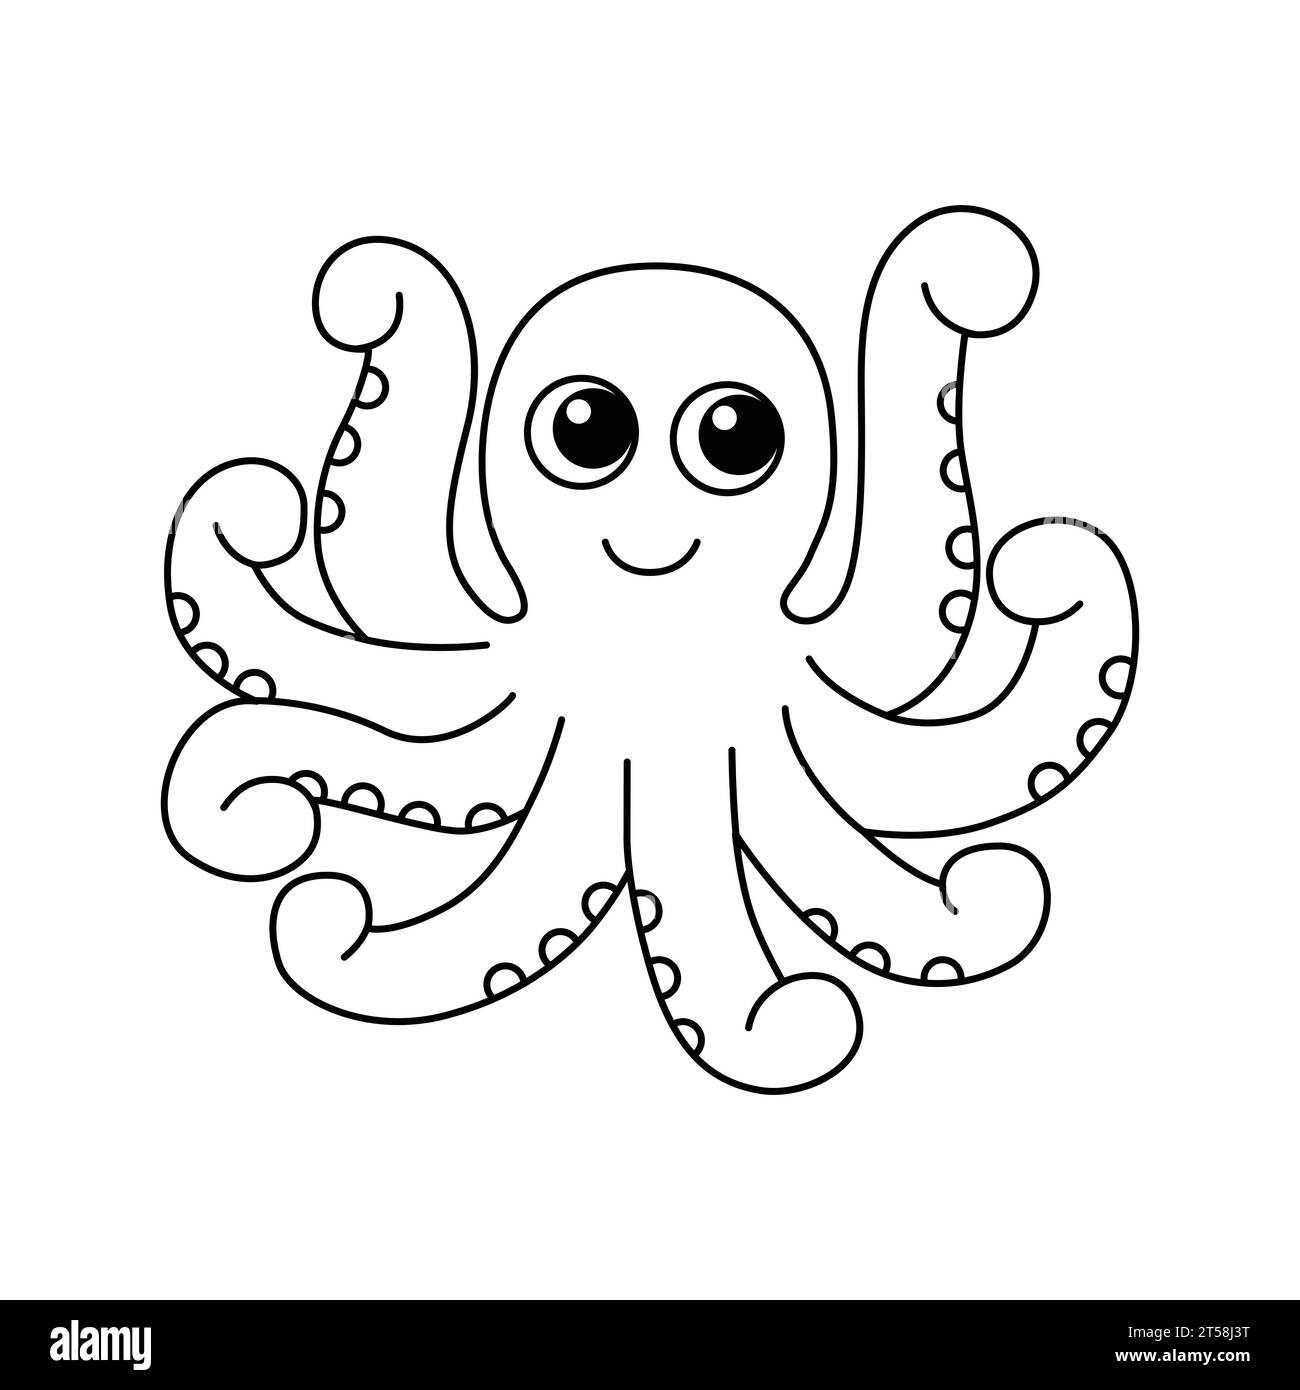 Basic octopus cartoon coloring page Royalty Free Vector Stock Vector ...